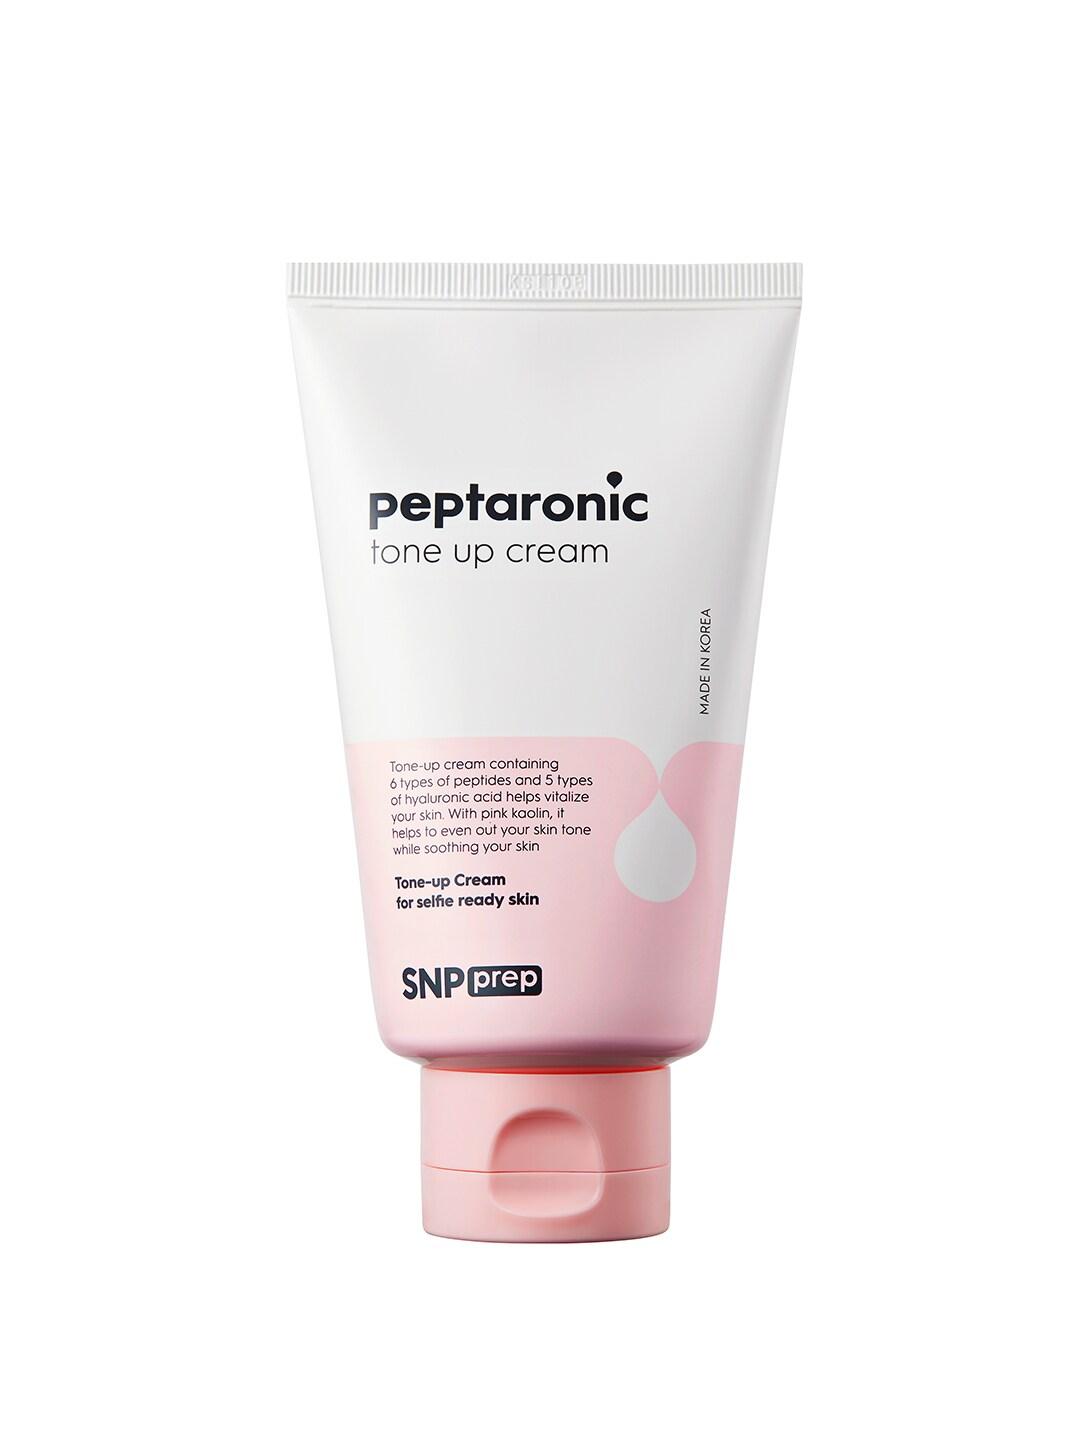 SNP Prep Peptaronic Tone Up Cream with Peptides & Hyaluronic Acid - 100 ml